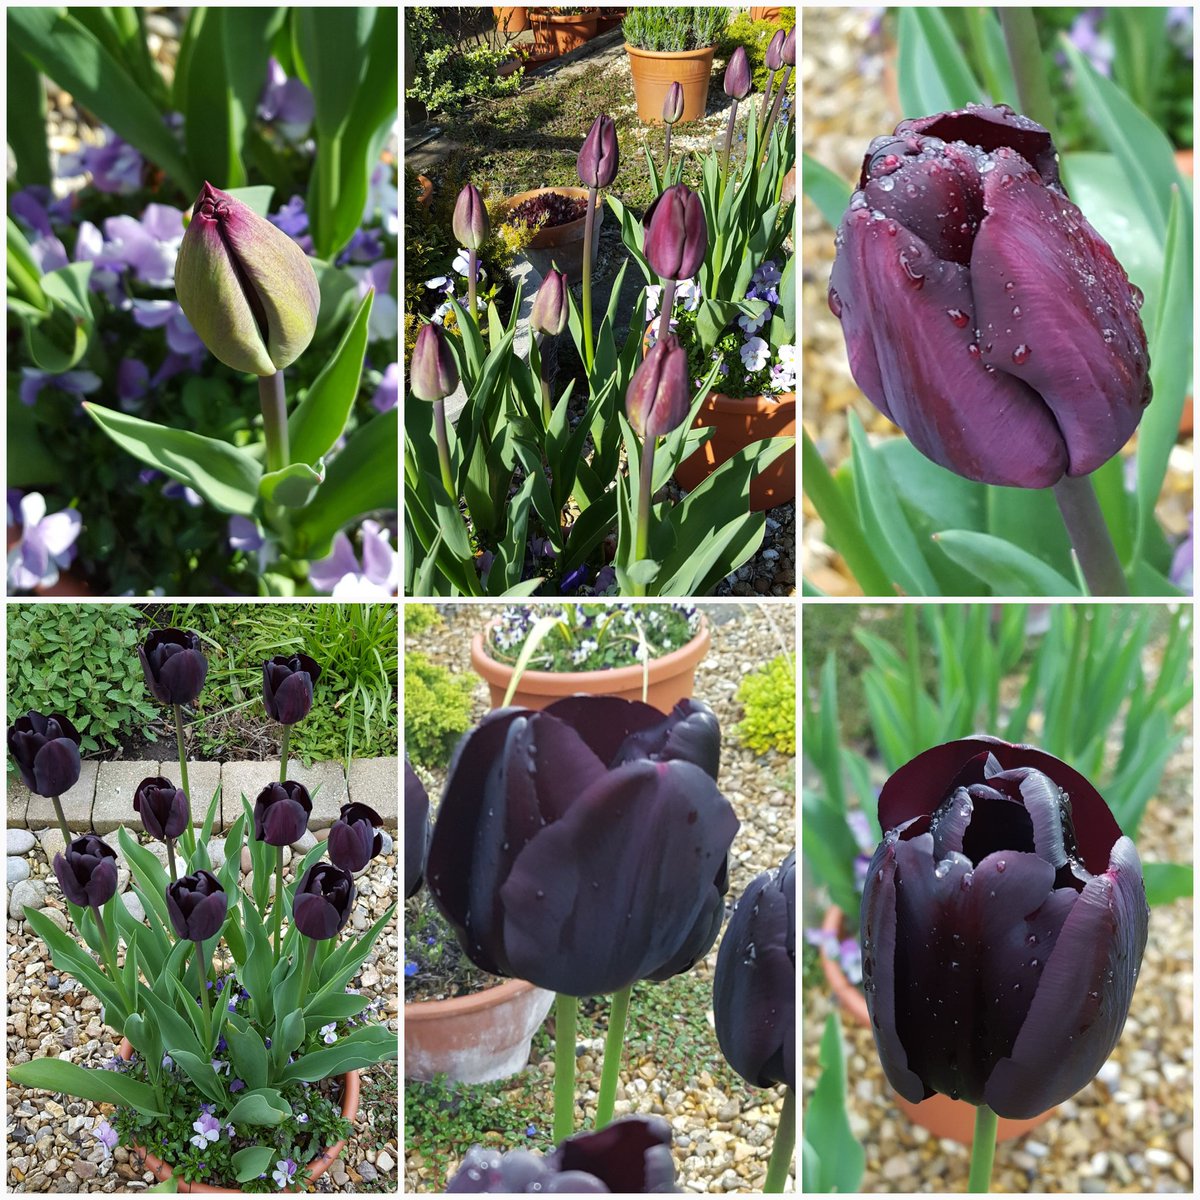 A cloudy, blustery Monday morning, but dry so far.
These tulips are perhaps a little too dark for #MagentaMonday but they are rather bewitching and they go through a palette of colour from green to deep purple.